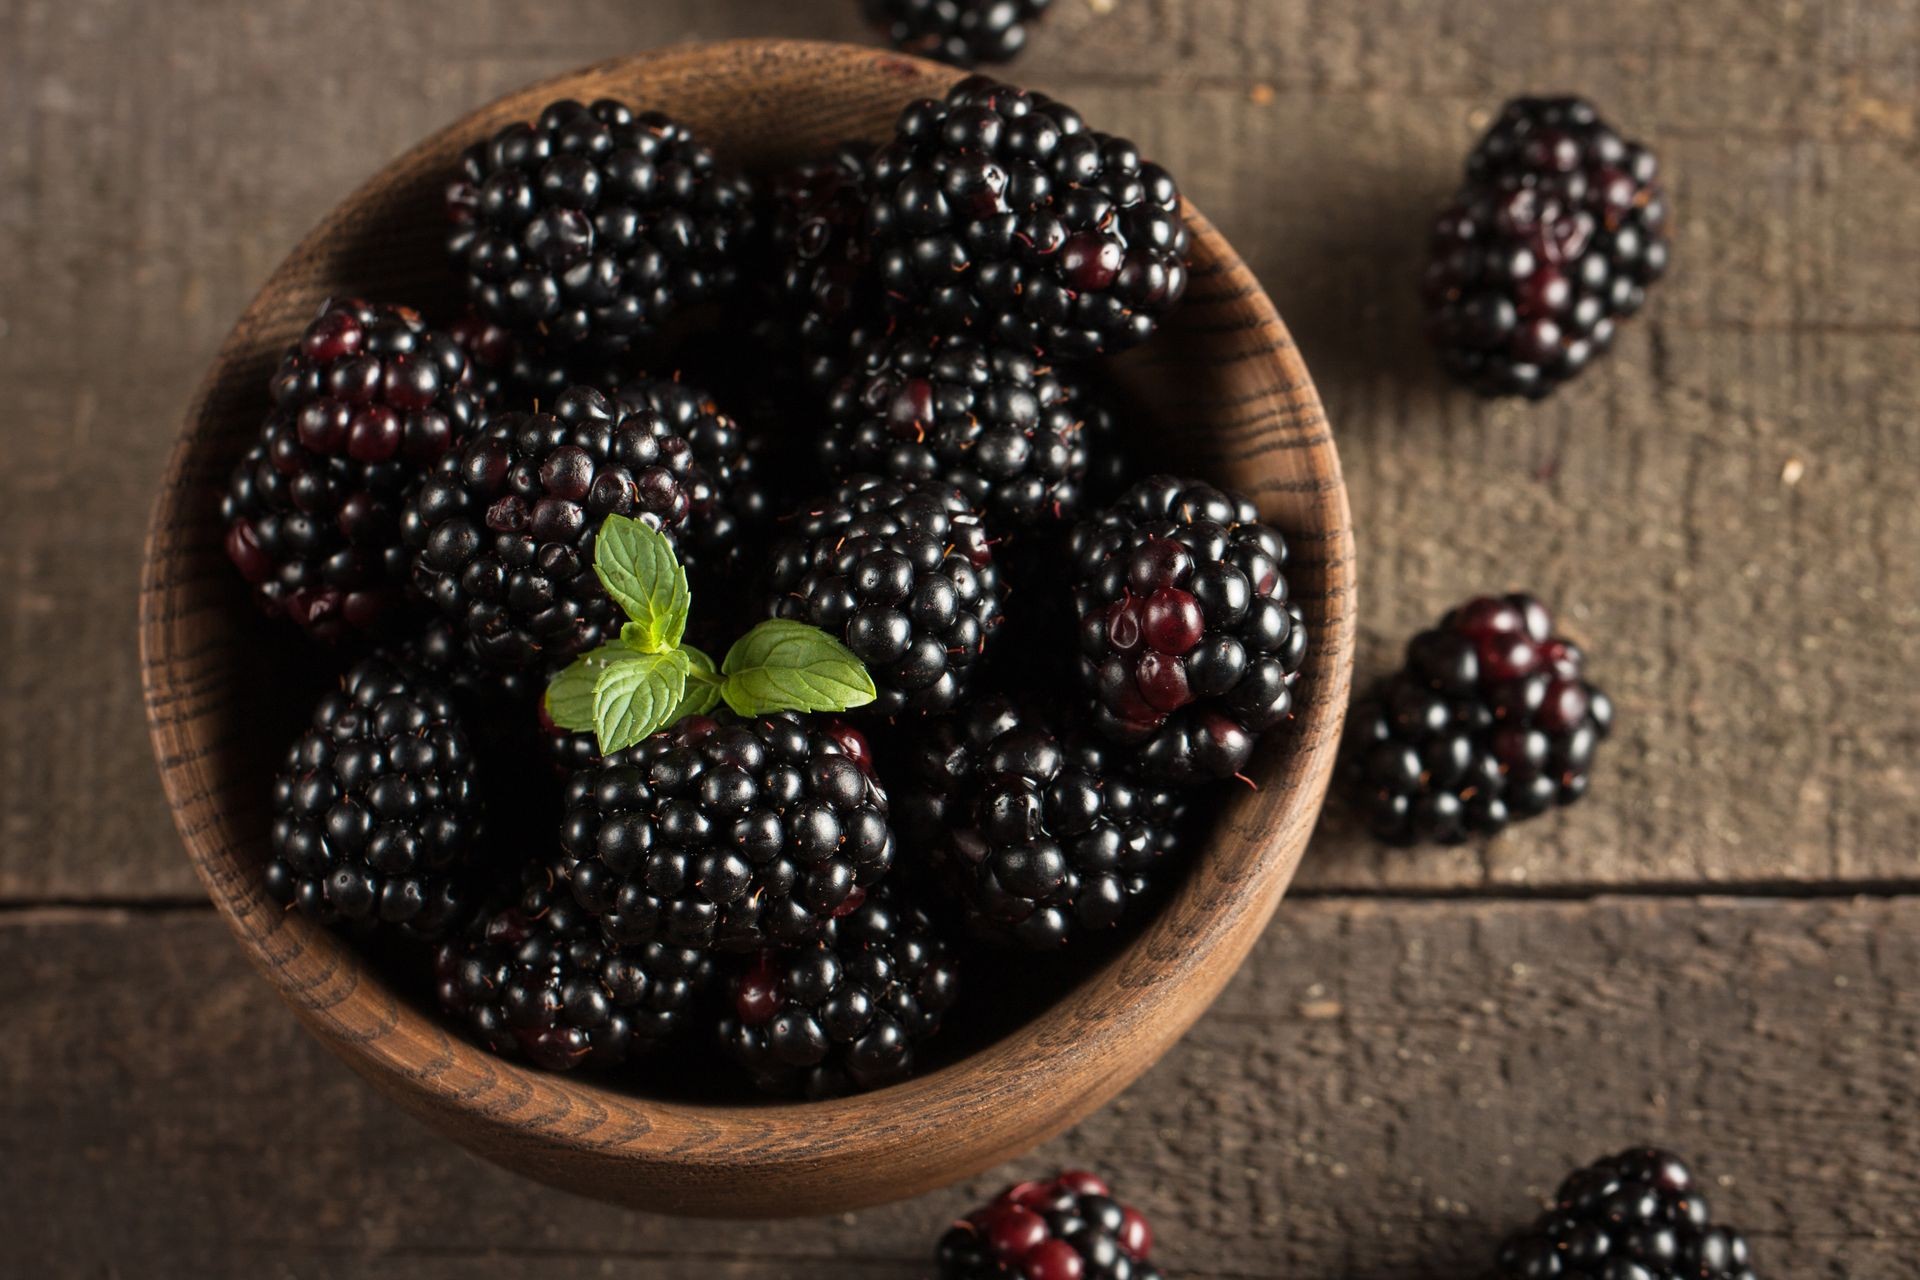 Fresh organic ripe blackberries in a wooden bowl on wooden background. Healthy rustic food concept.